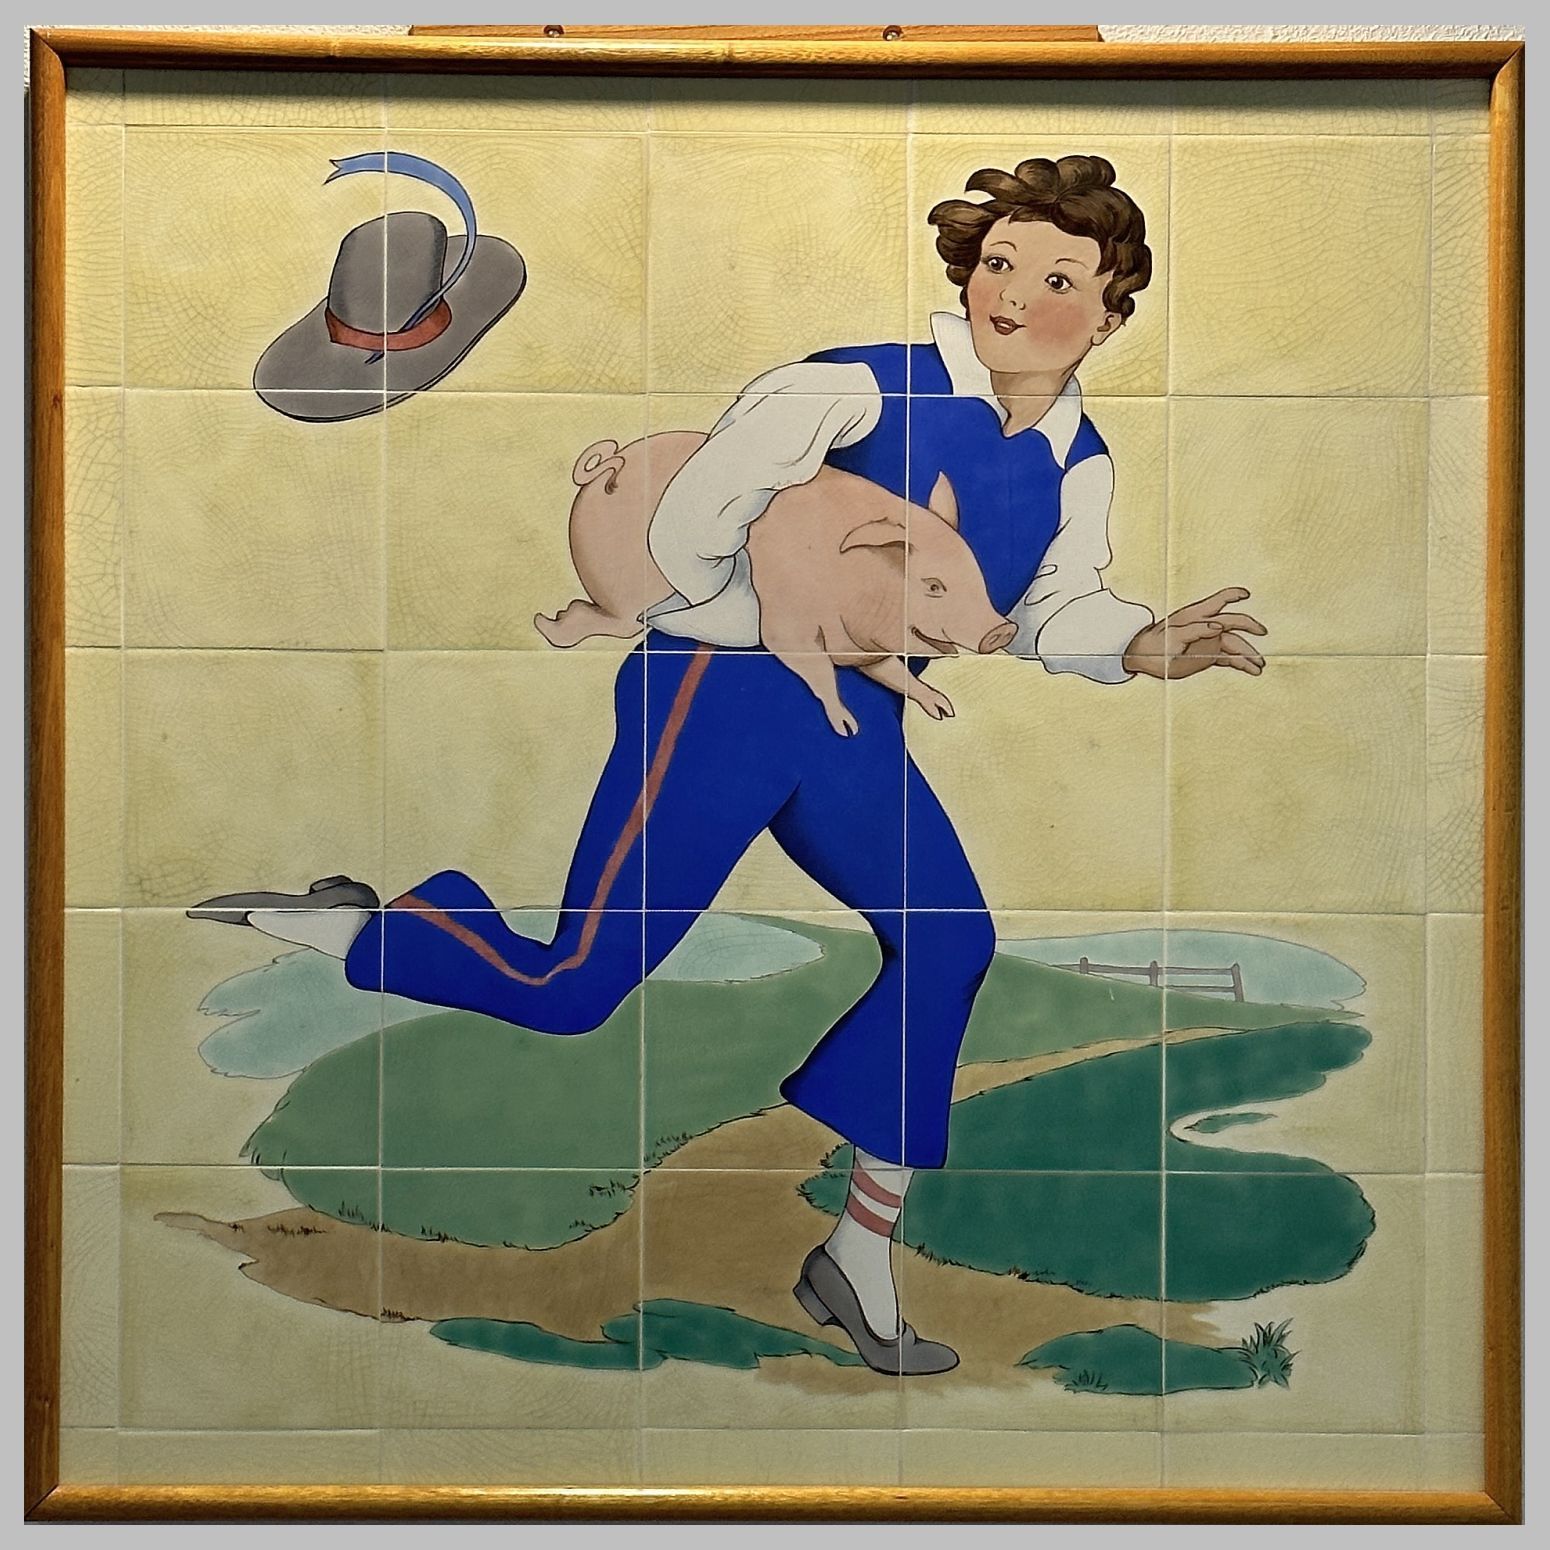 Jack and the Beanstalk nursery rhyme fairy tale scene painted on Doulton tiles (commissioned around 1900) from the Evelina Children's Hospital displayed in Guys' hospital.